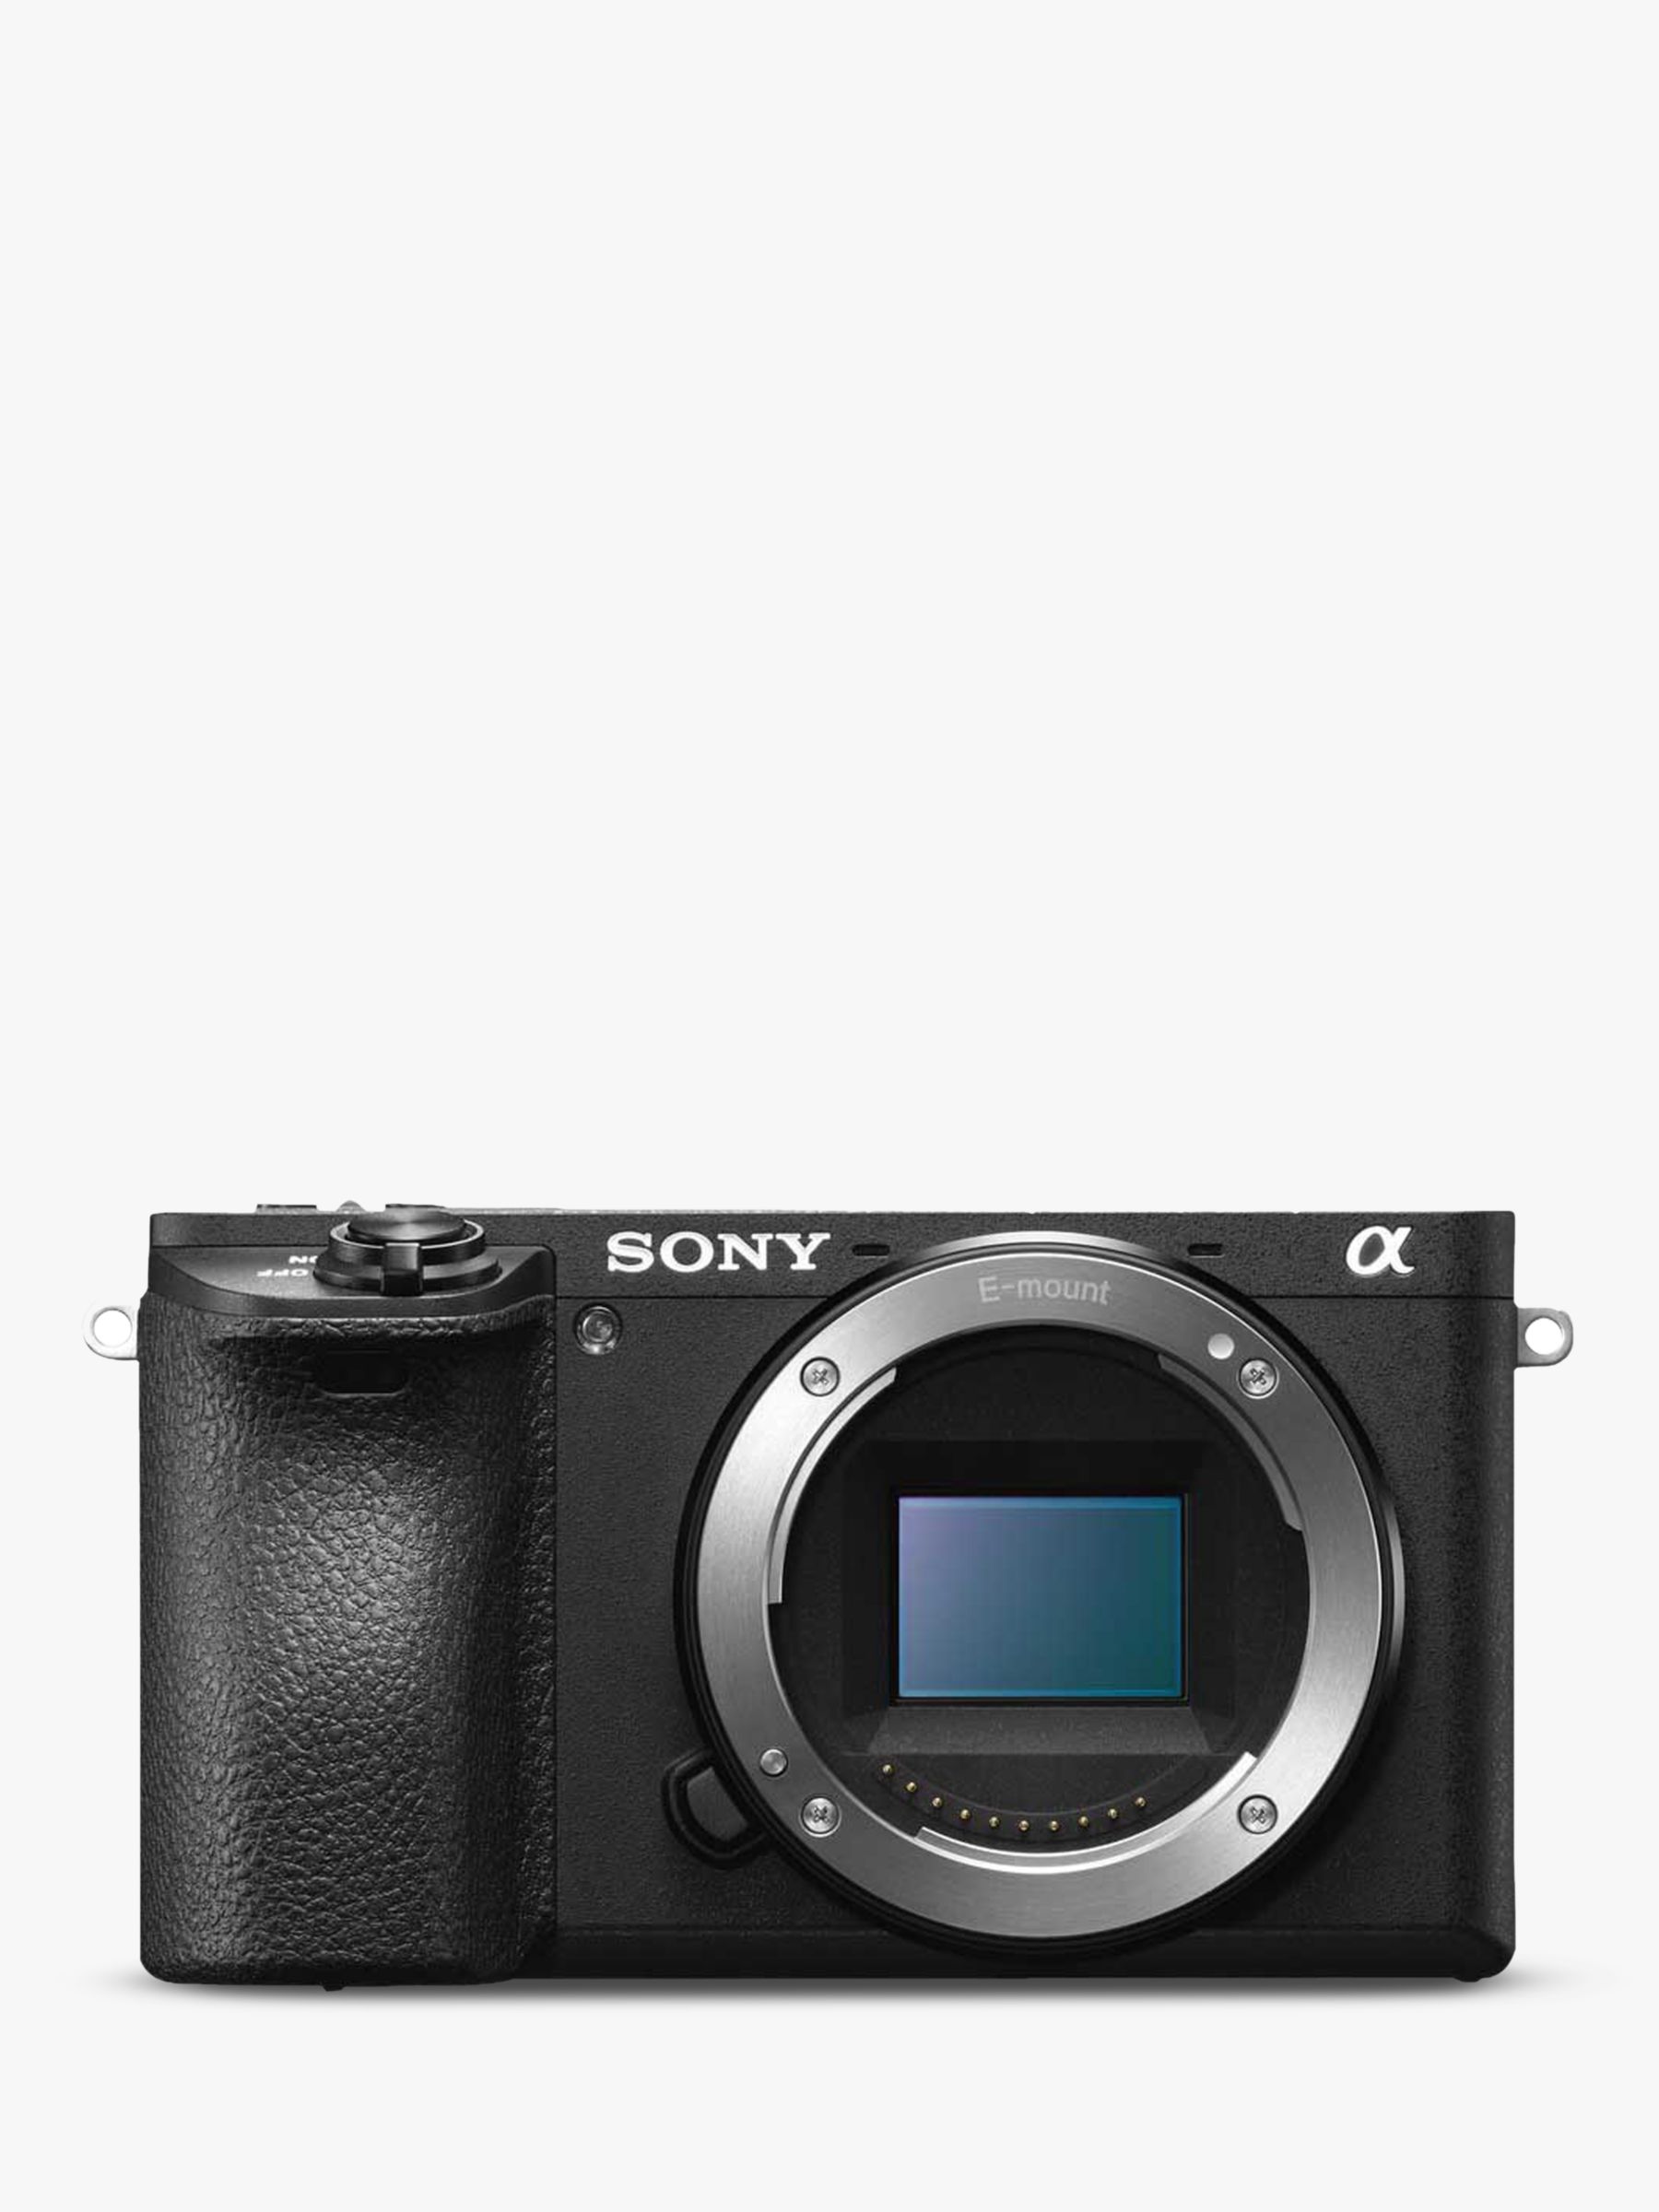 Sony A6500 Compact System Camera, 4K Ultra HD, 25MP, OLED Viewfinder, Wi-Fi, NFC, 3 LCD Touchscreen, Body Only